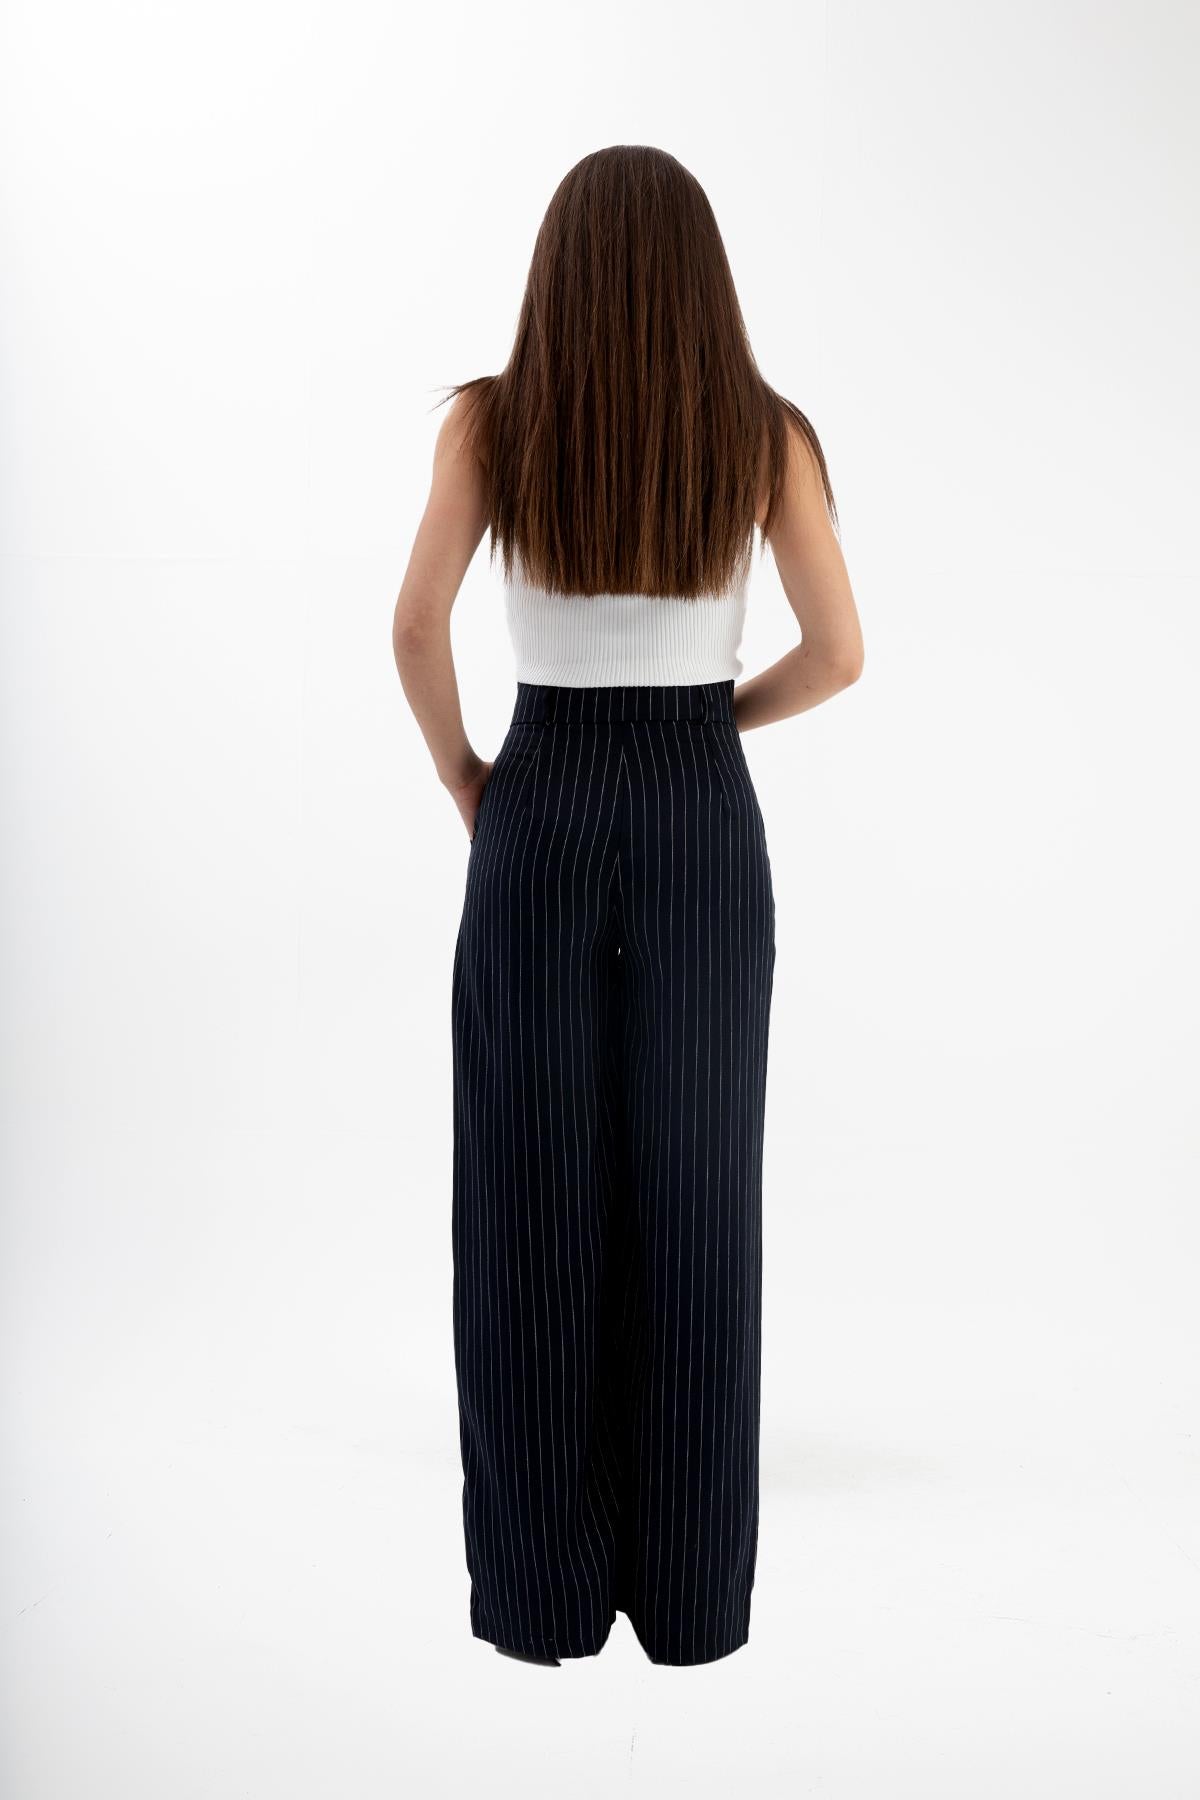 High Waist Striped Women's Palazzo Trousers - Navy Blue - STREETMODE™